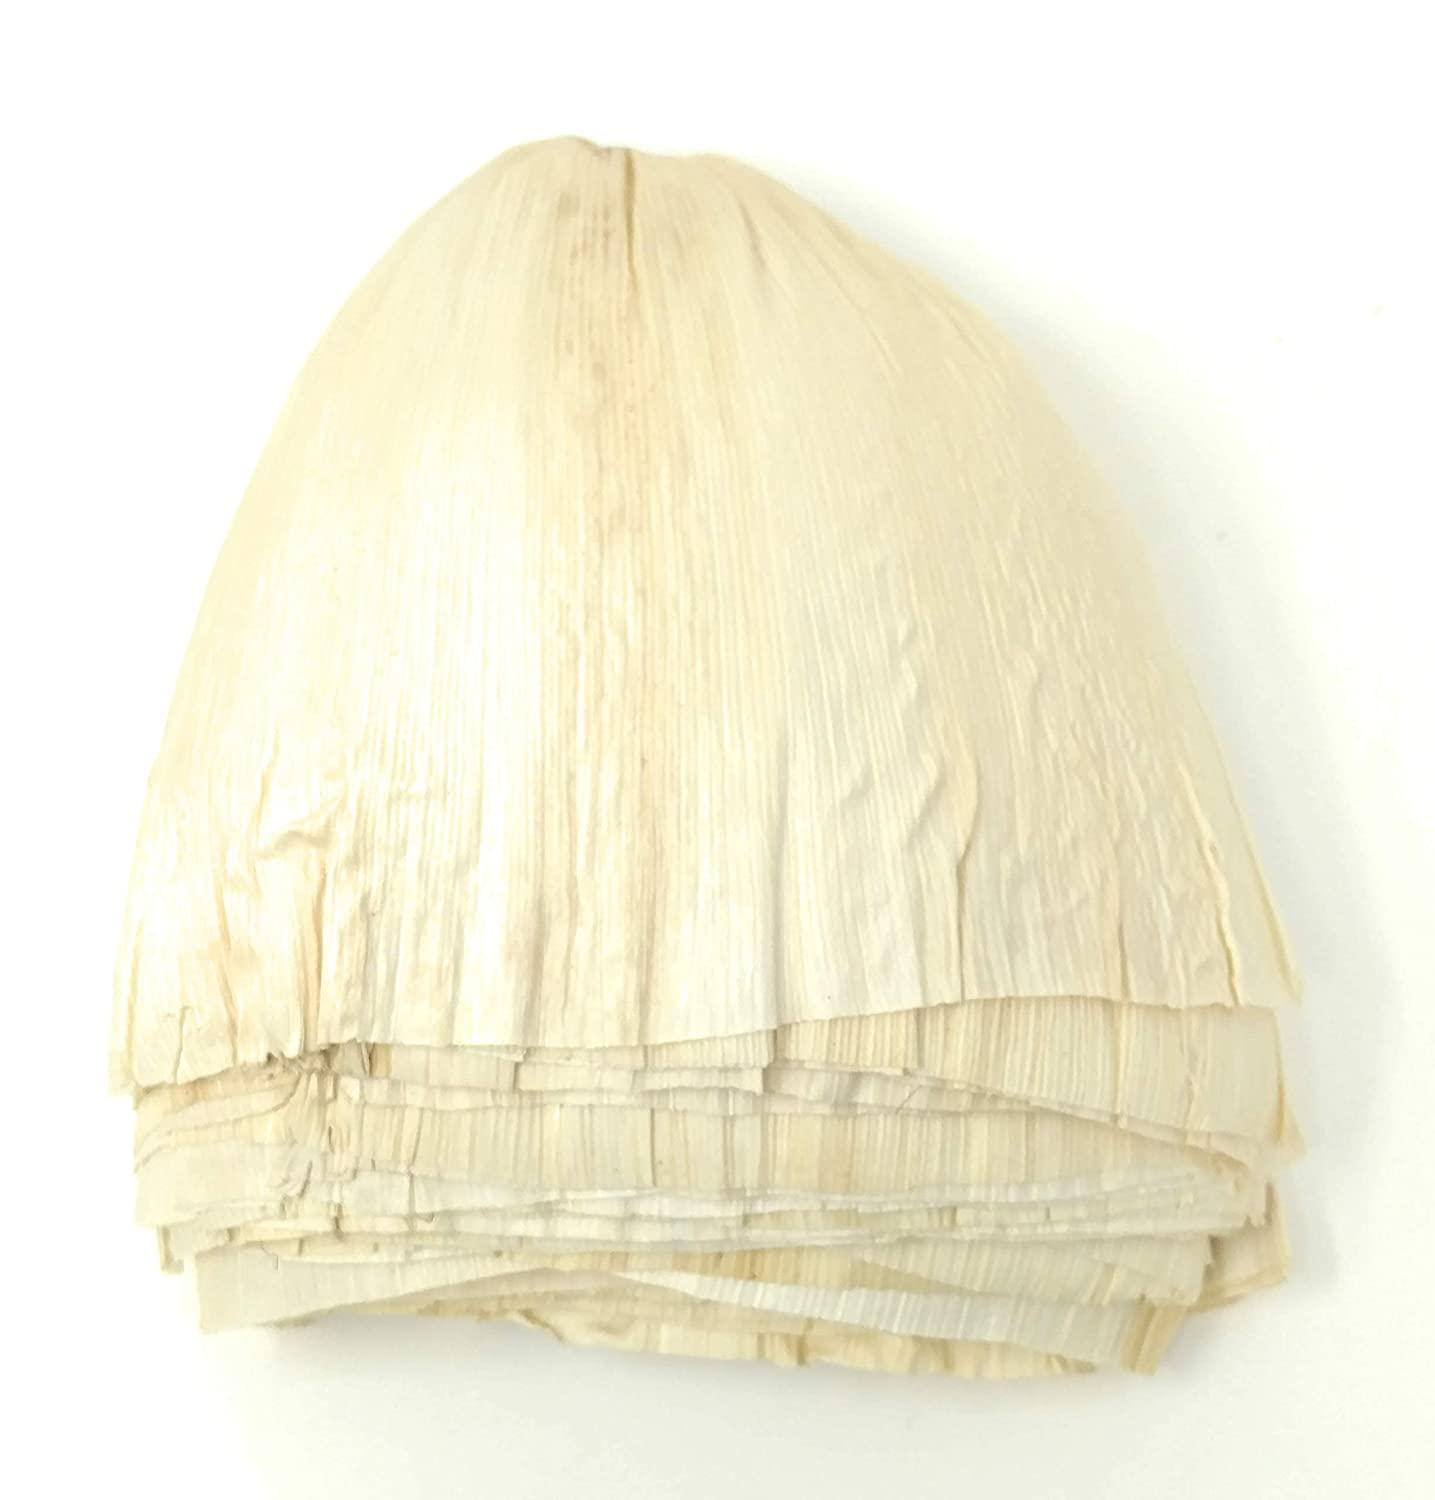 Corn Husks For Tamales 1 LB (16oz) Natural and Premium Dried Corn Husk  Tamale Wrappers Hojas Para Tamal. By Amazing Chiles and Spices.